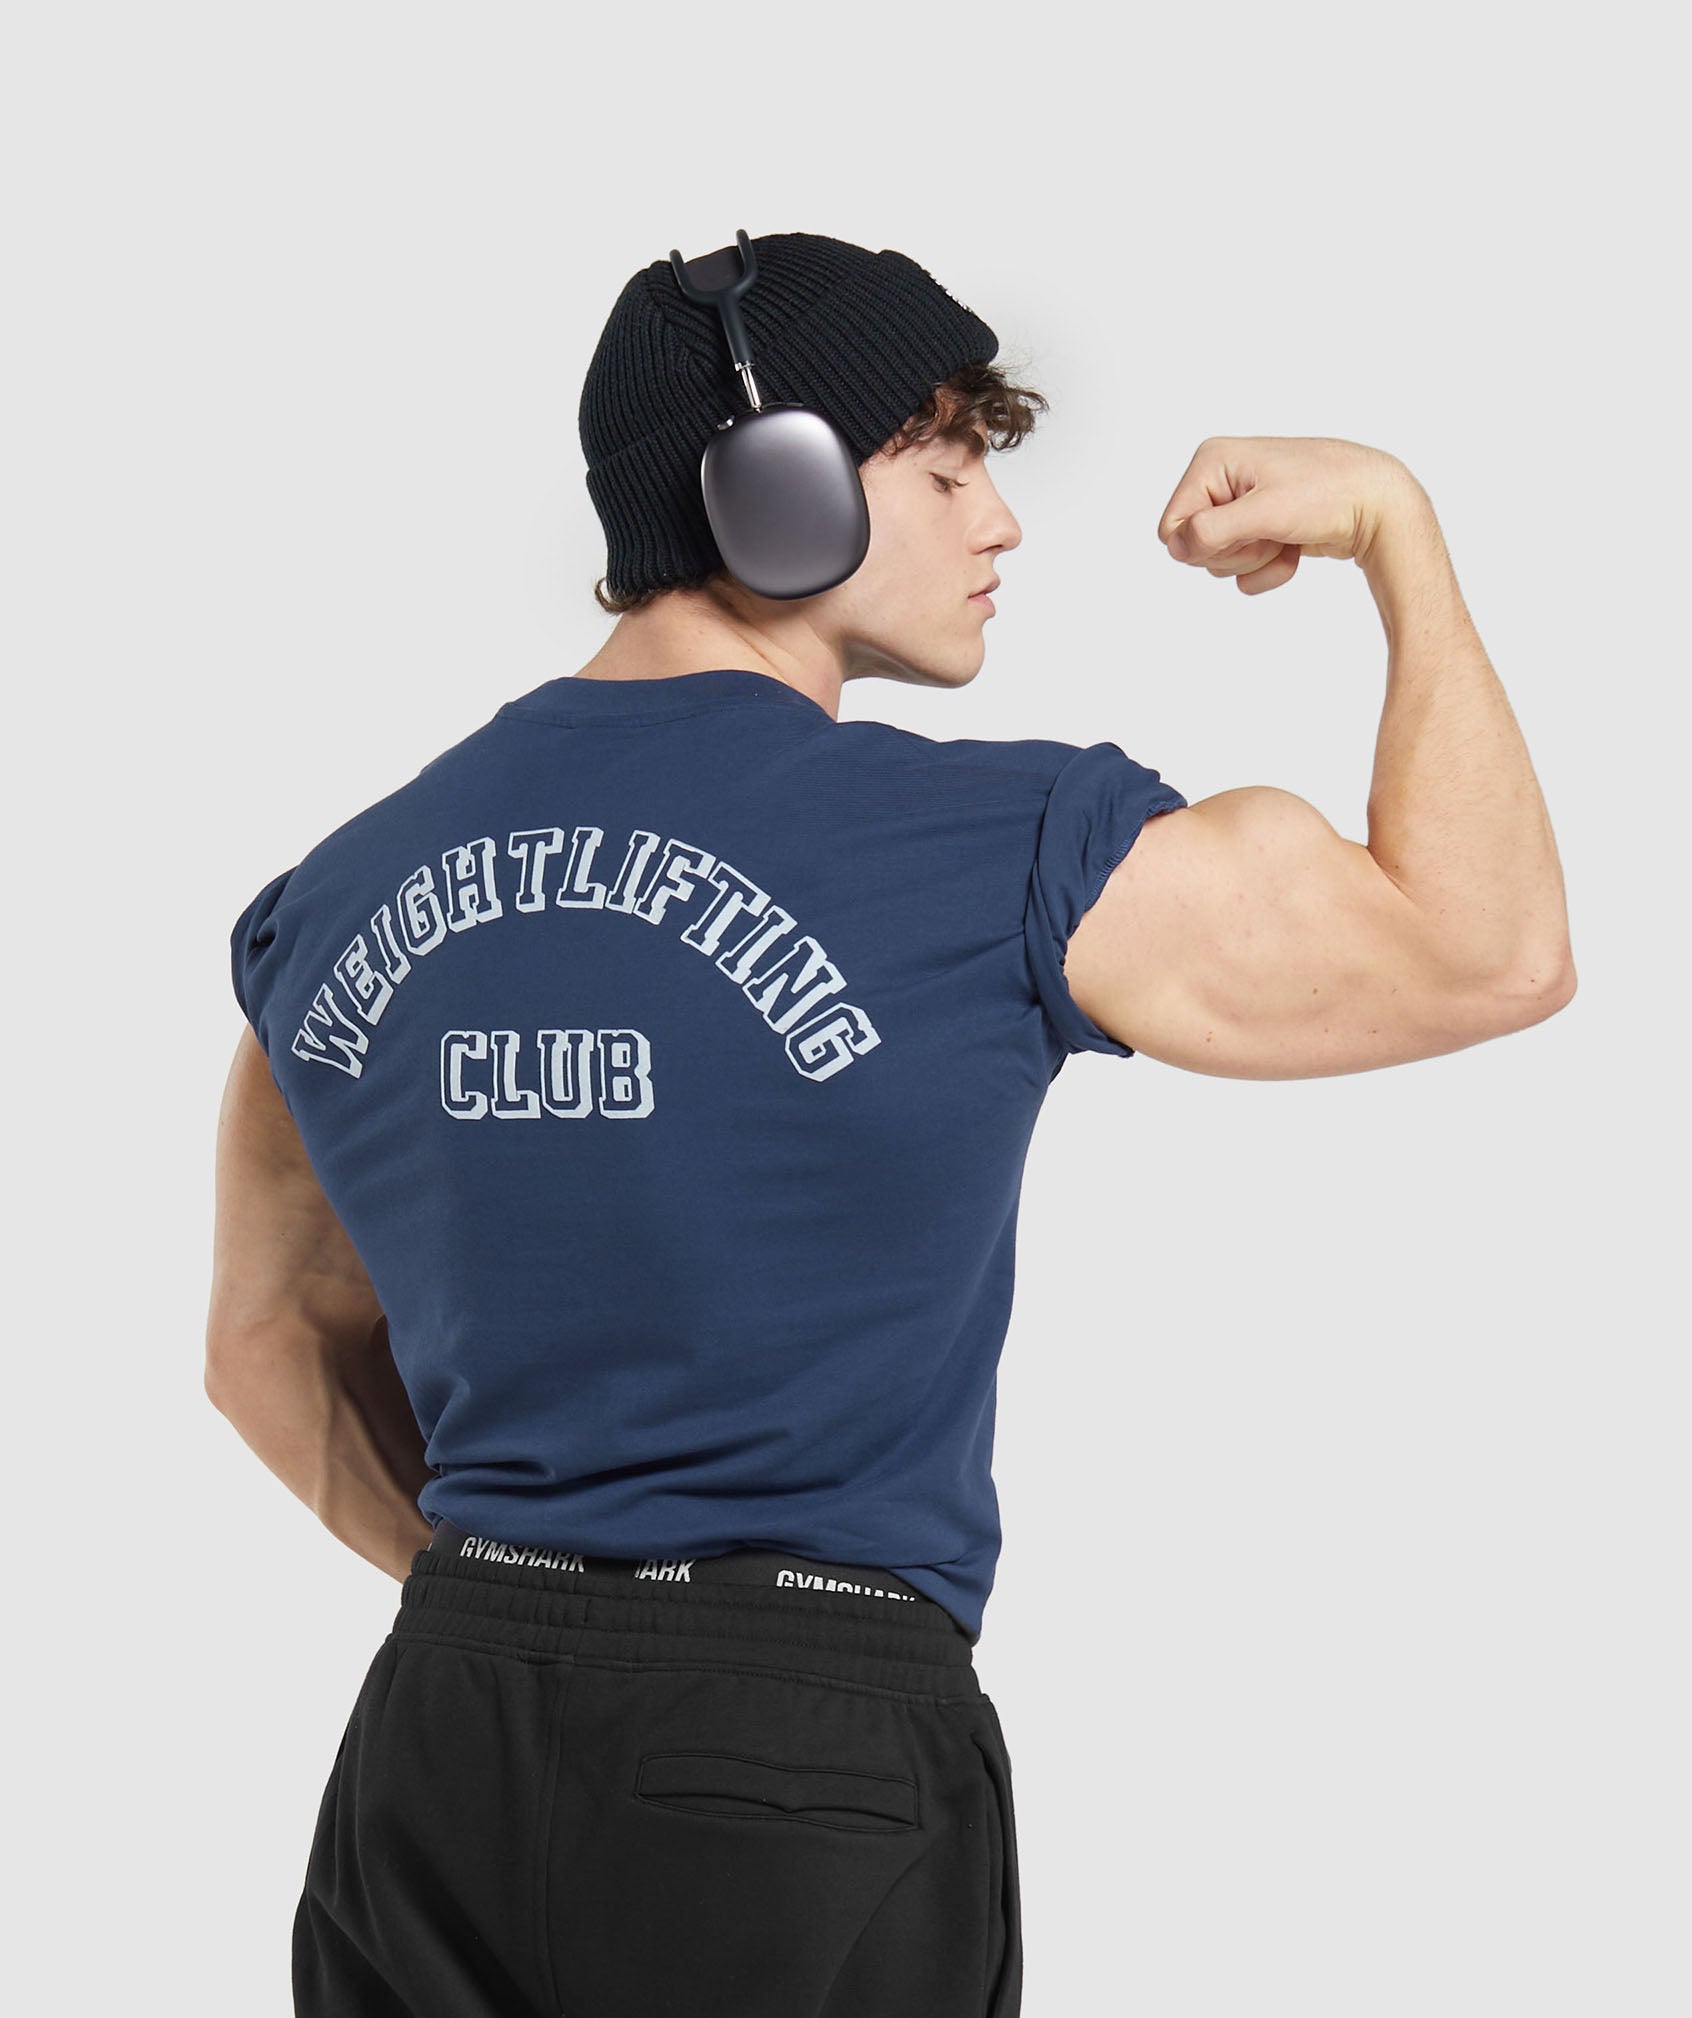 Weightlifting Club T-Shirt in Ash Blue - view 1